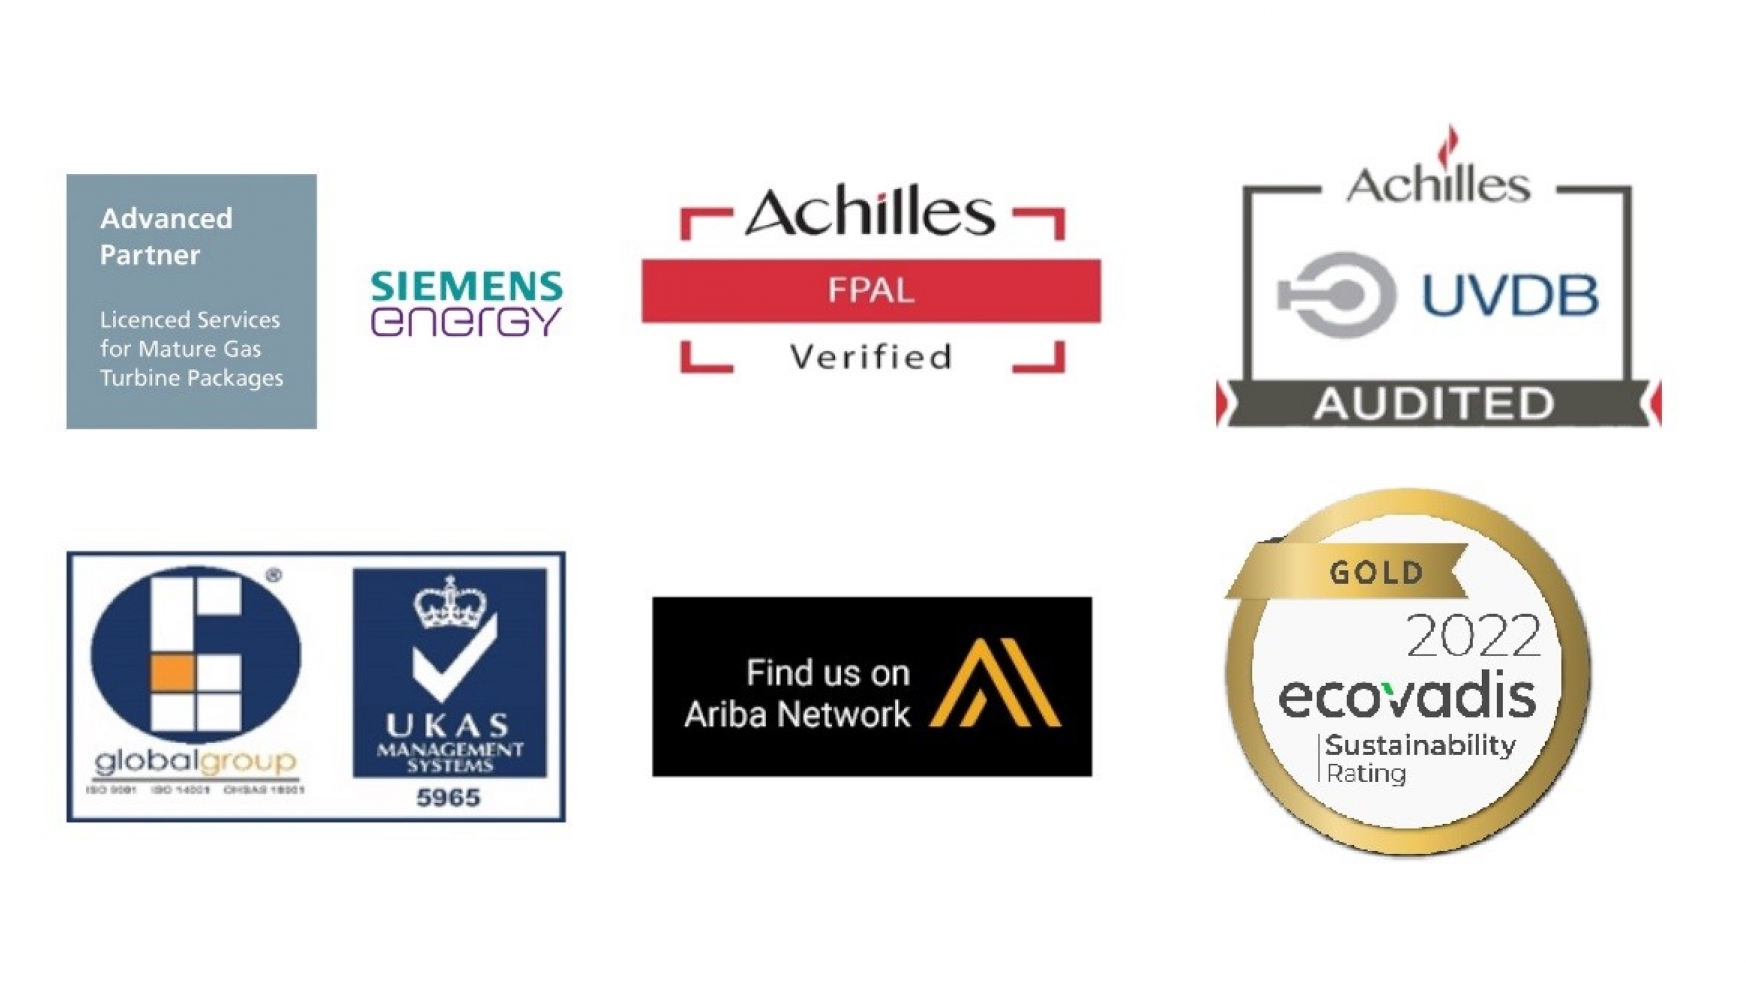 Our commitment to our values is supported by our partners